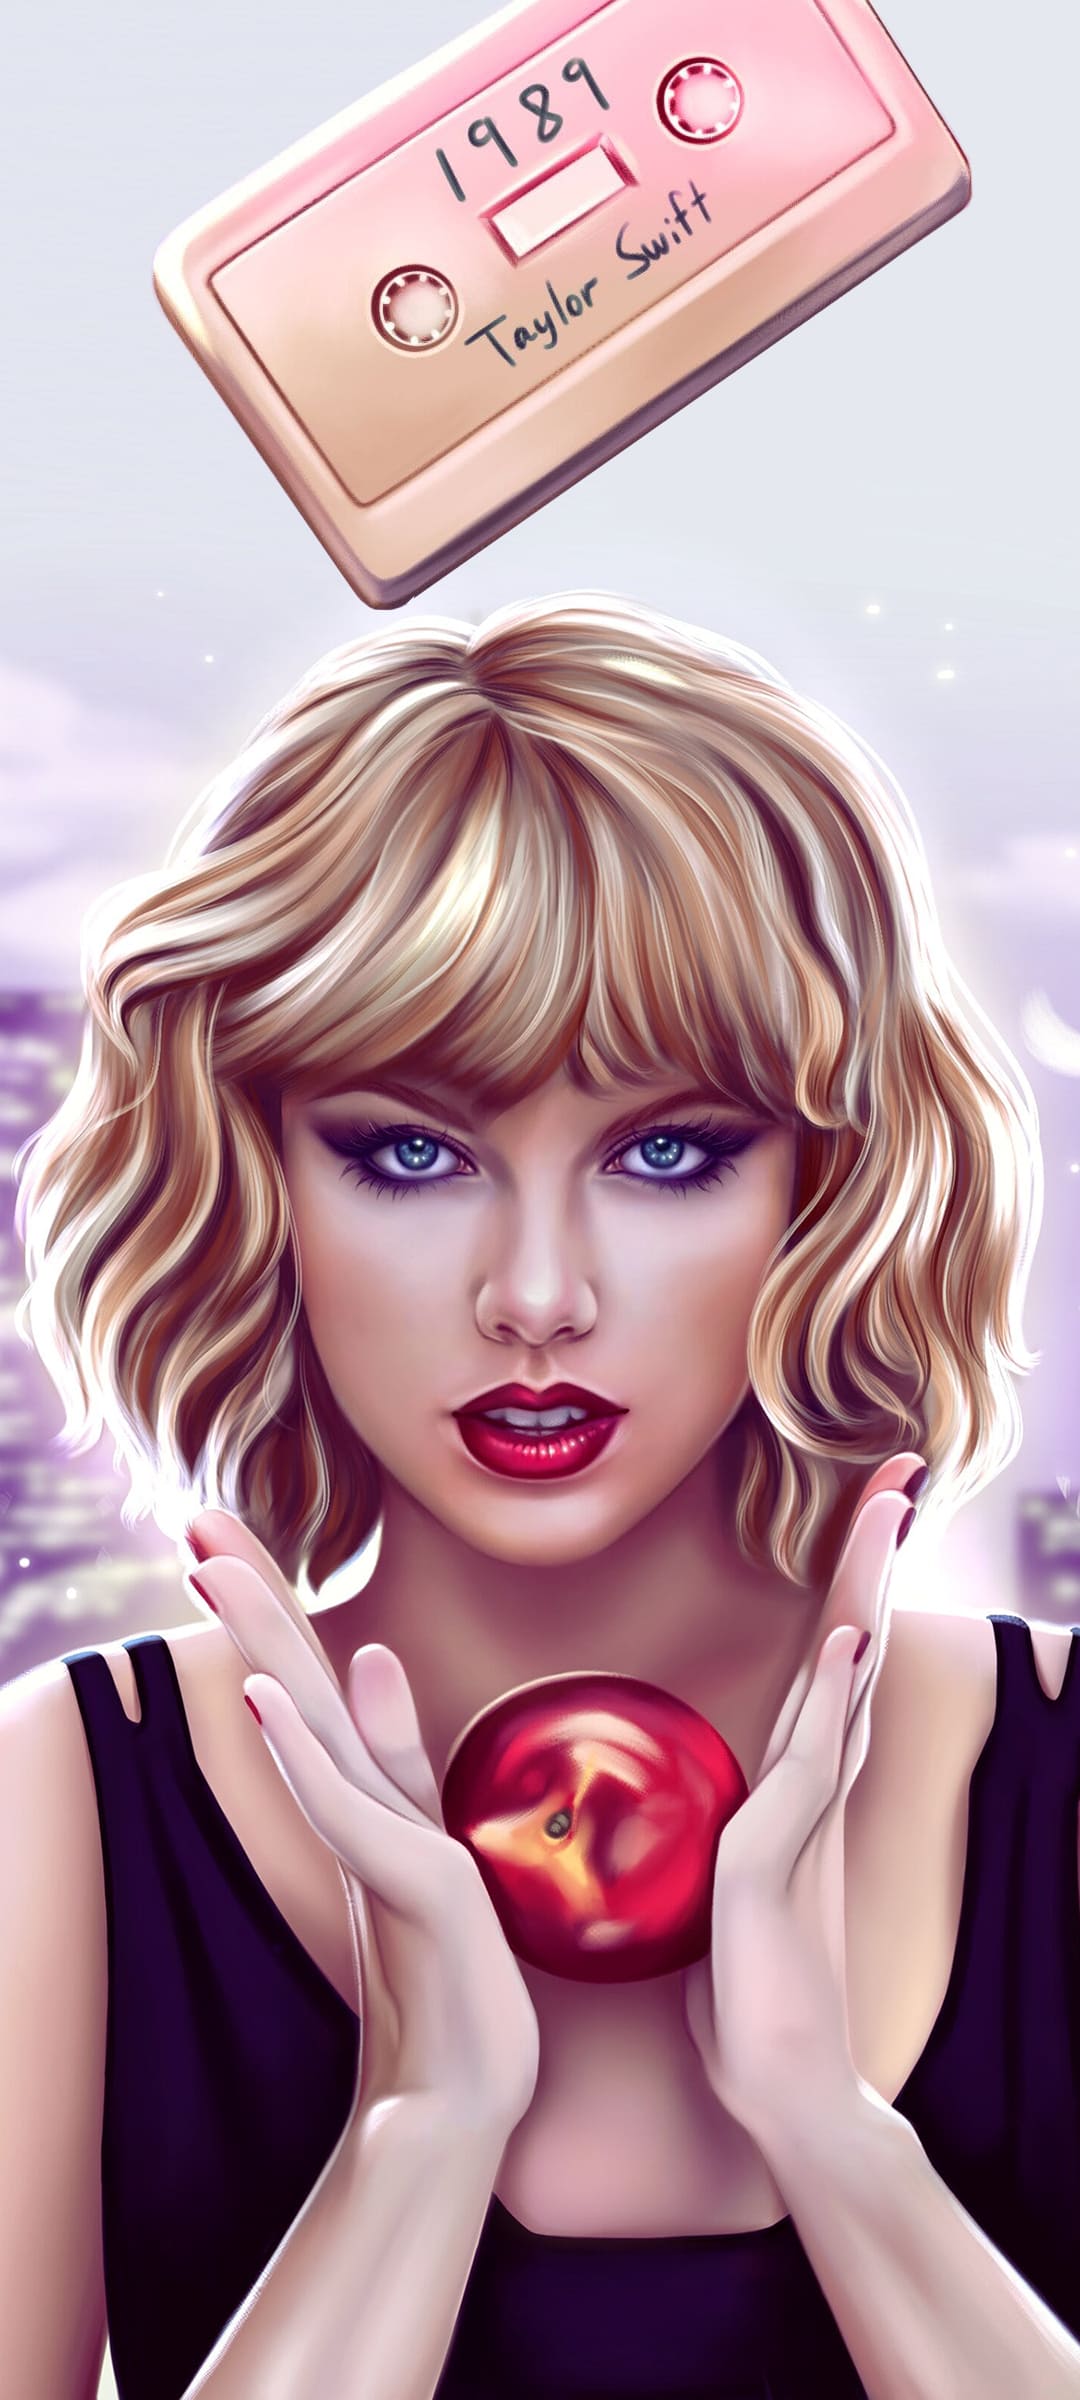 1989 Taylor's Version Wallpapers